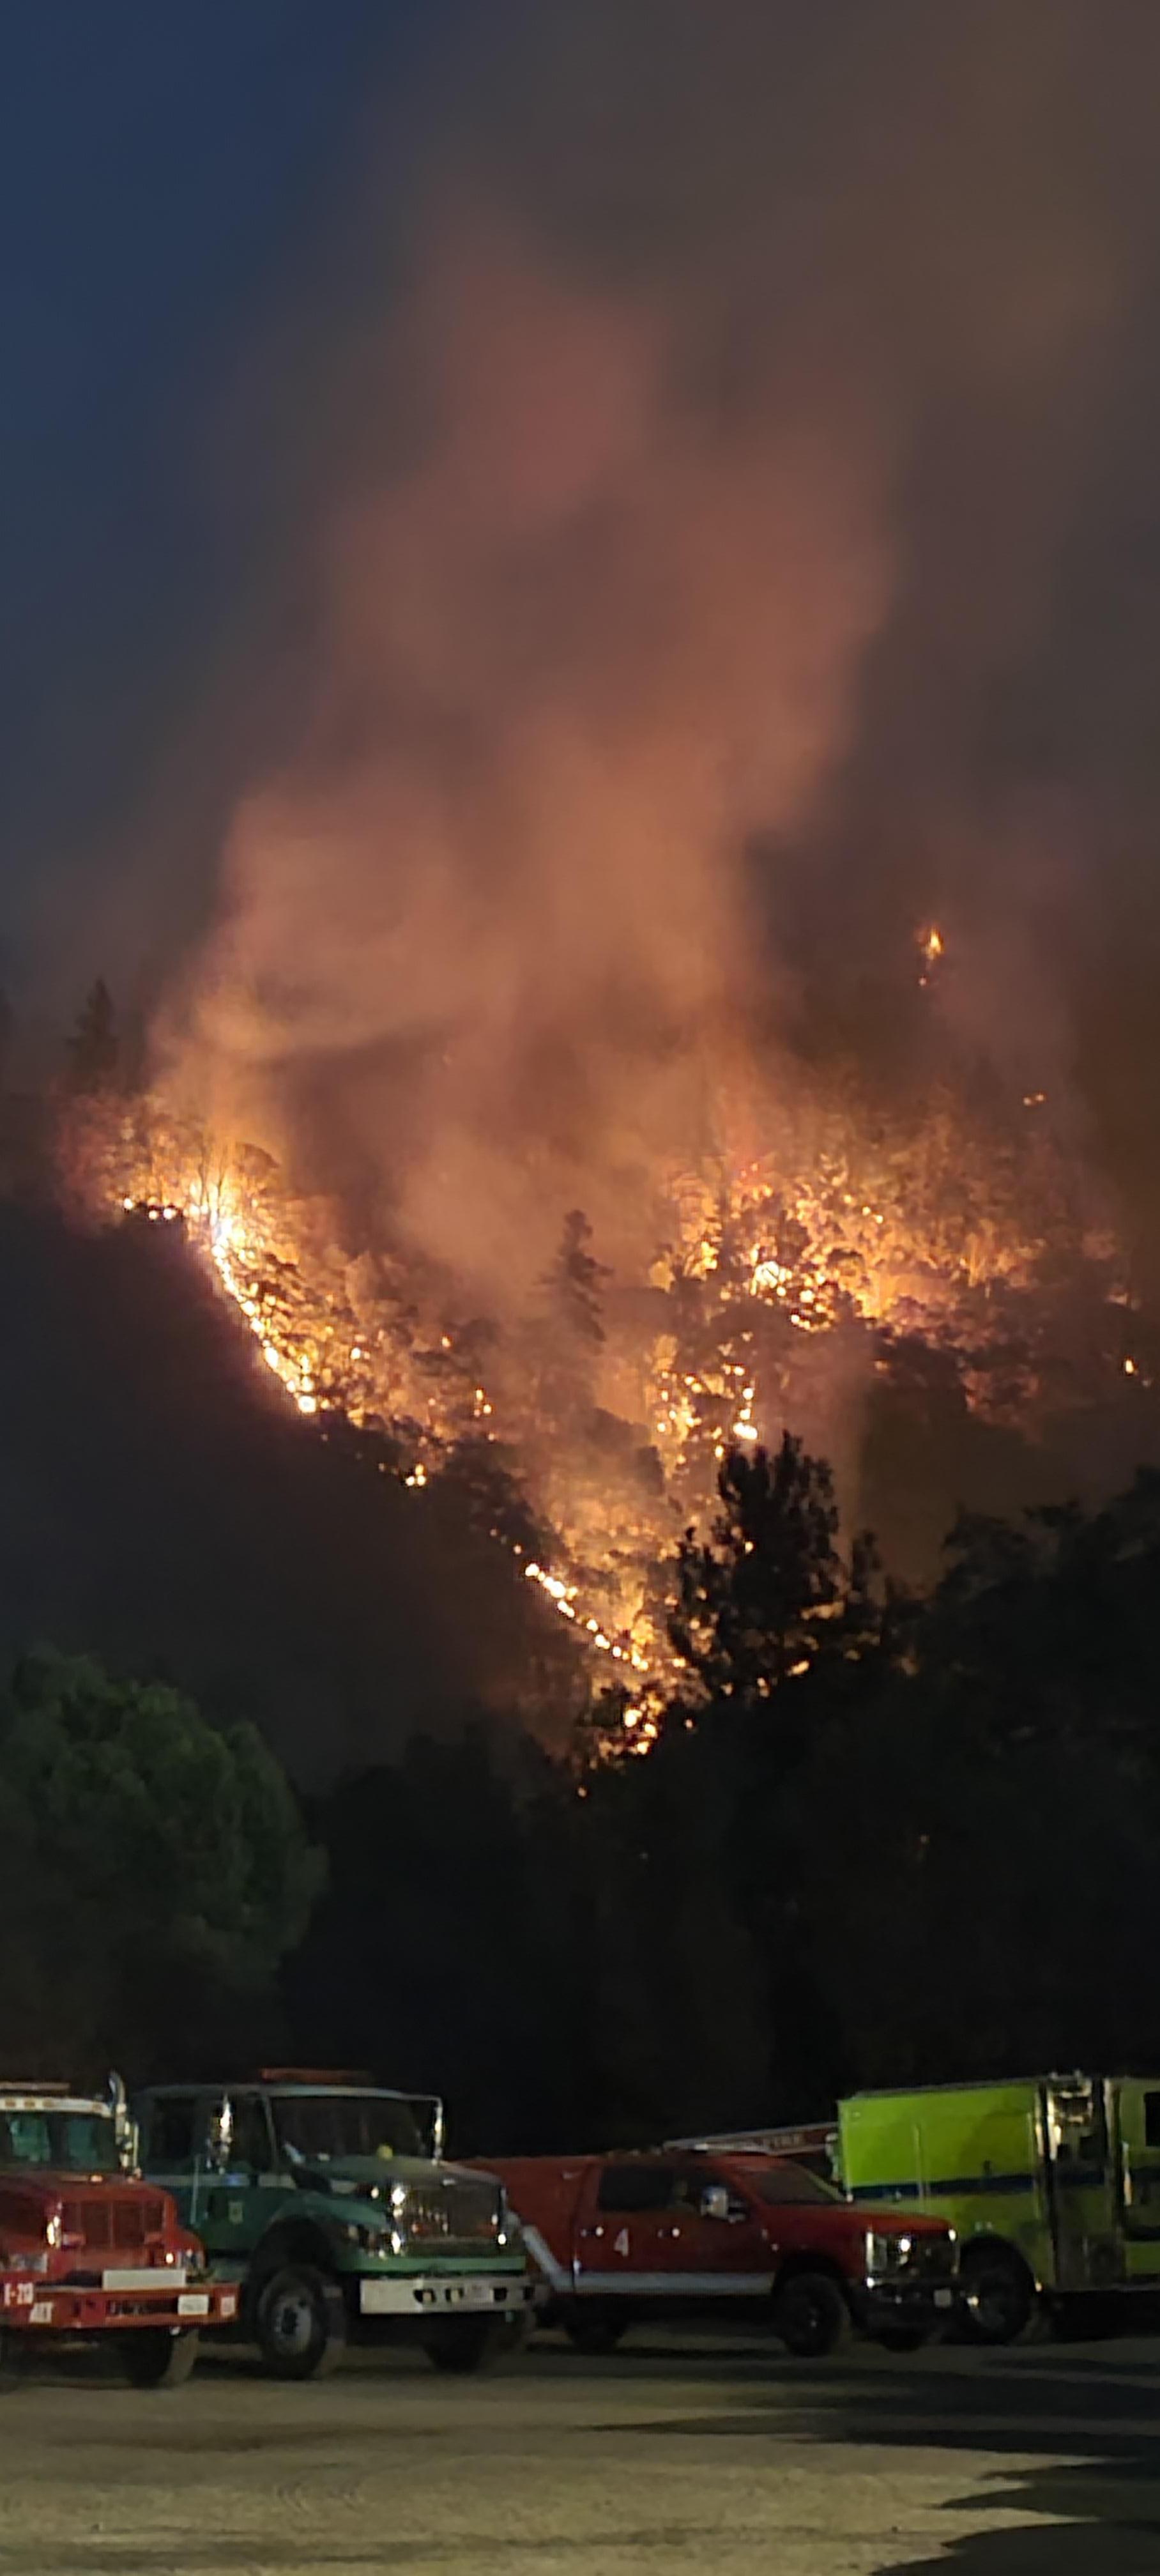 Photo depicts a steep forested hillside at night, flames and smoke can be seen rising off the dark trees